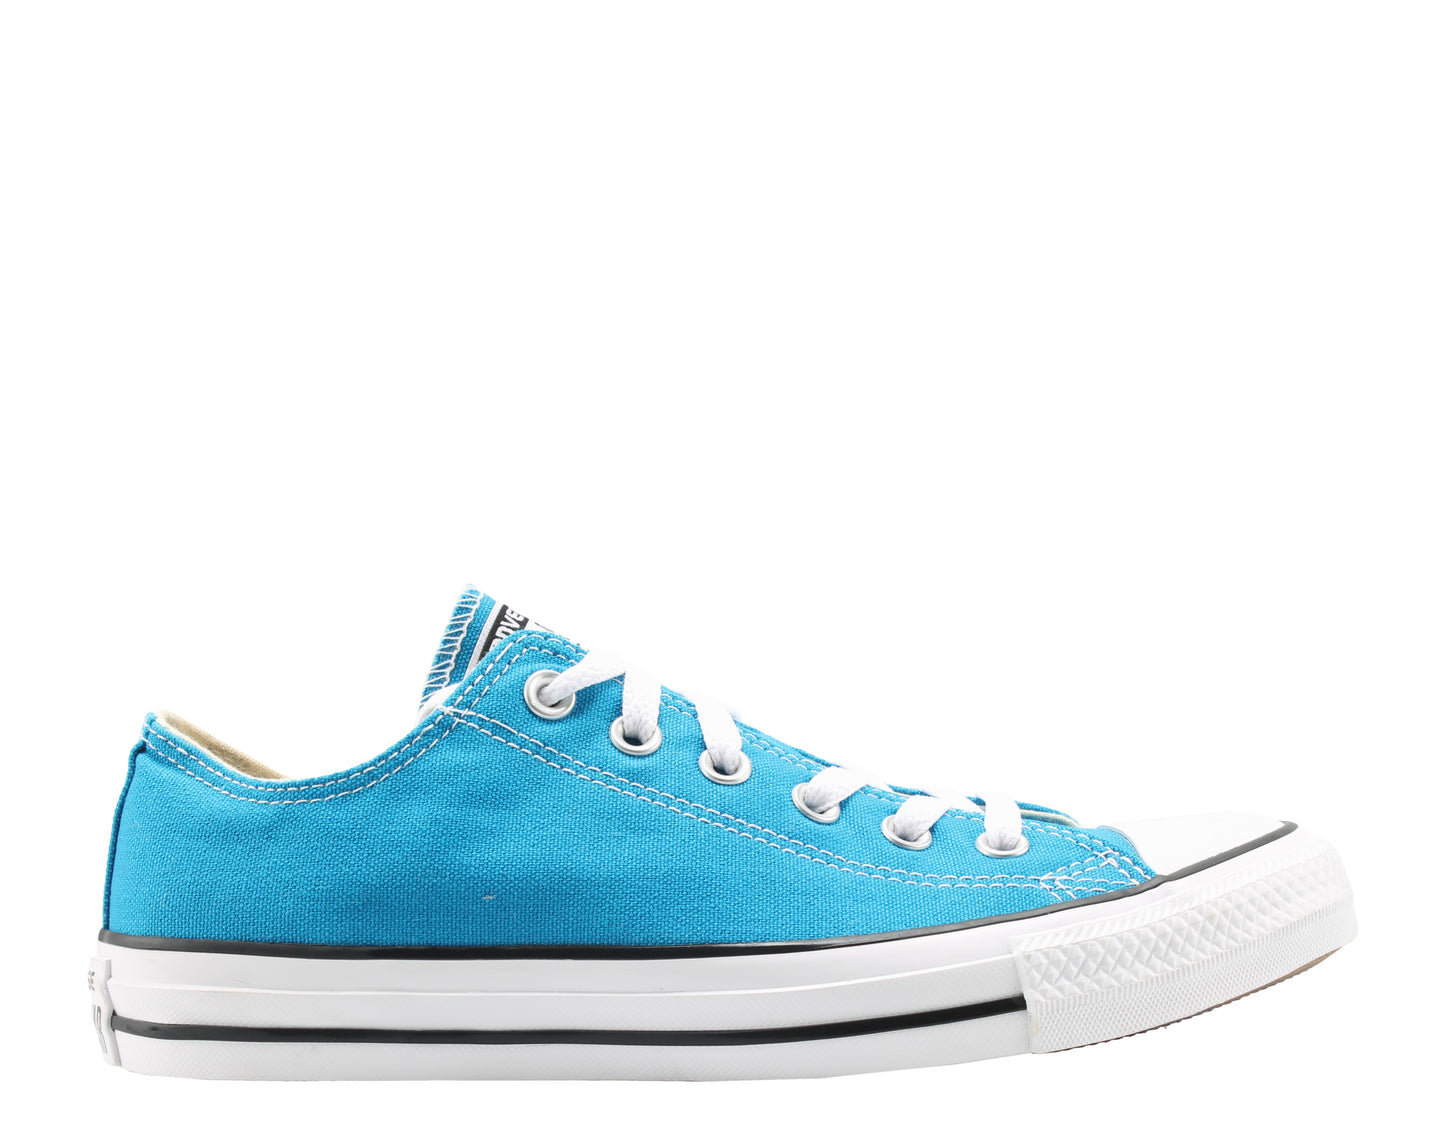 Converse Chuck Taylor All Star OX Cyan Space Blue Low Top Sneakers 149520F